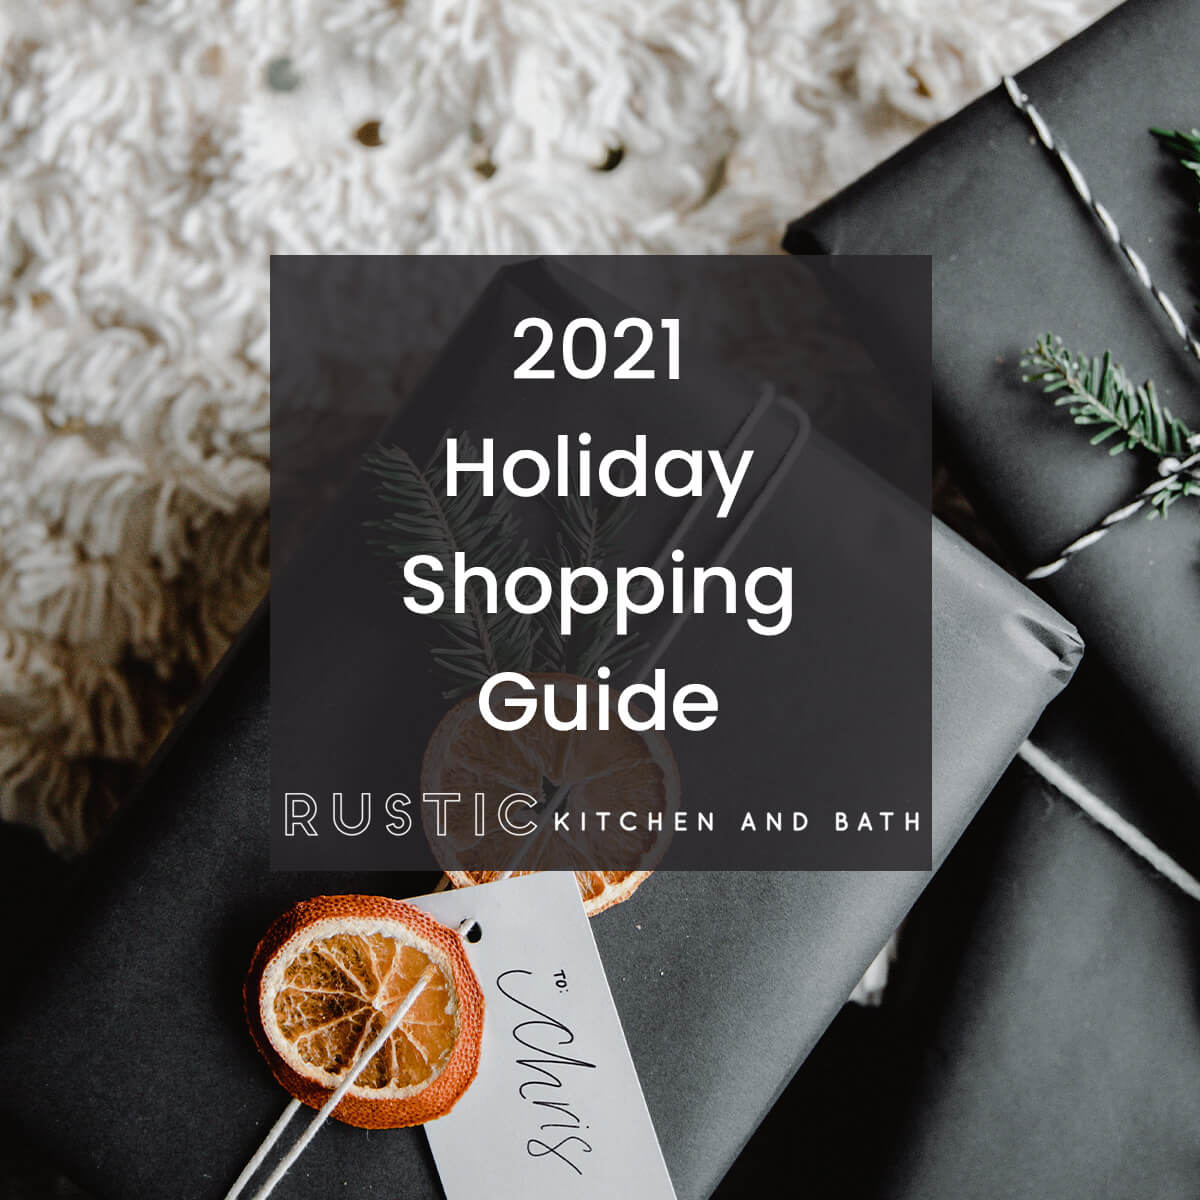 Rustic Kitchen and Bath’s 2021 Holiday Shopping Guide